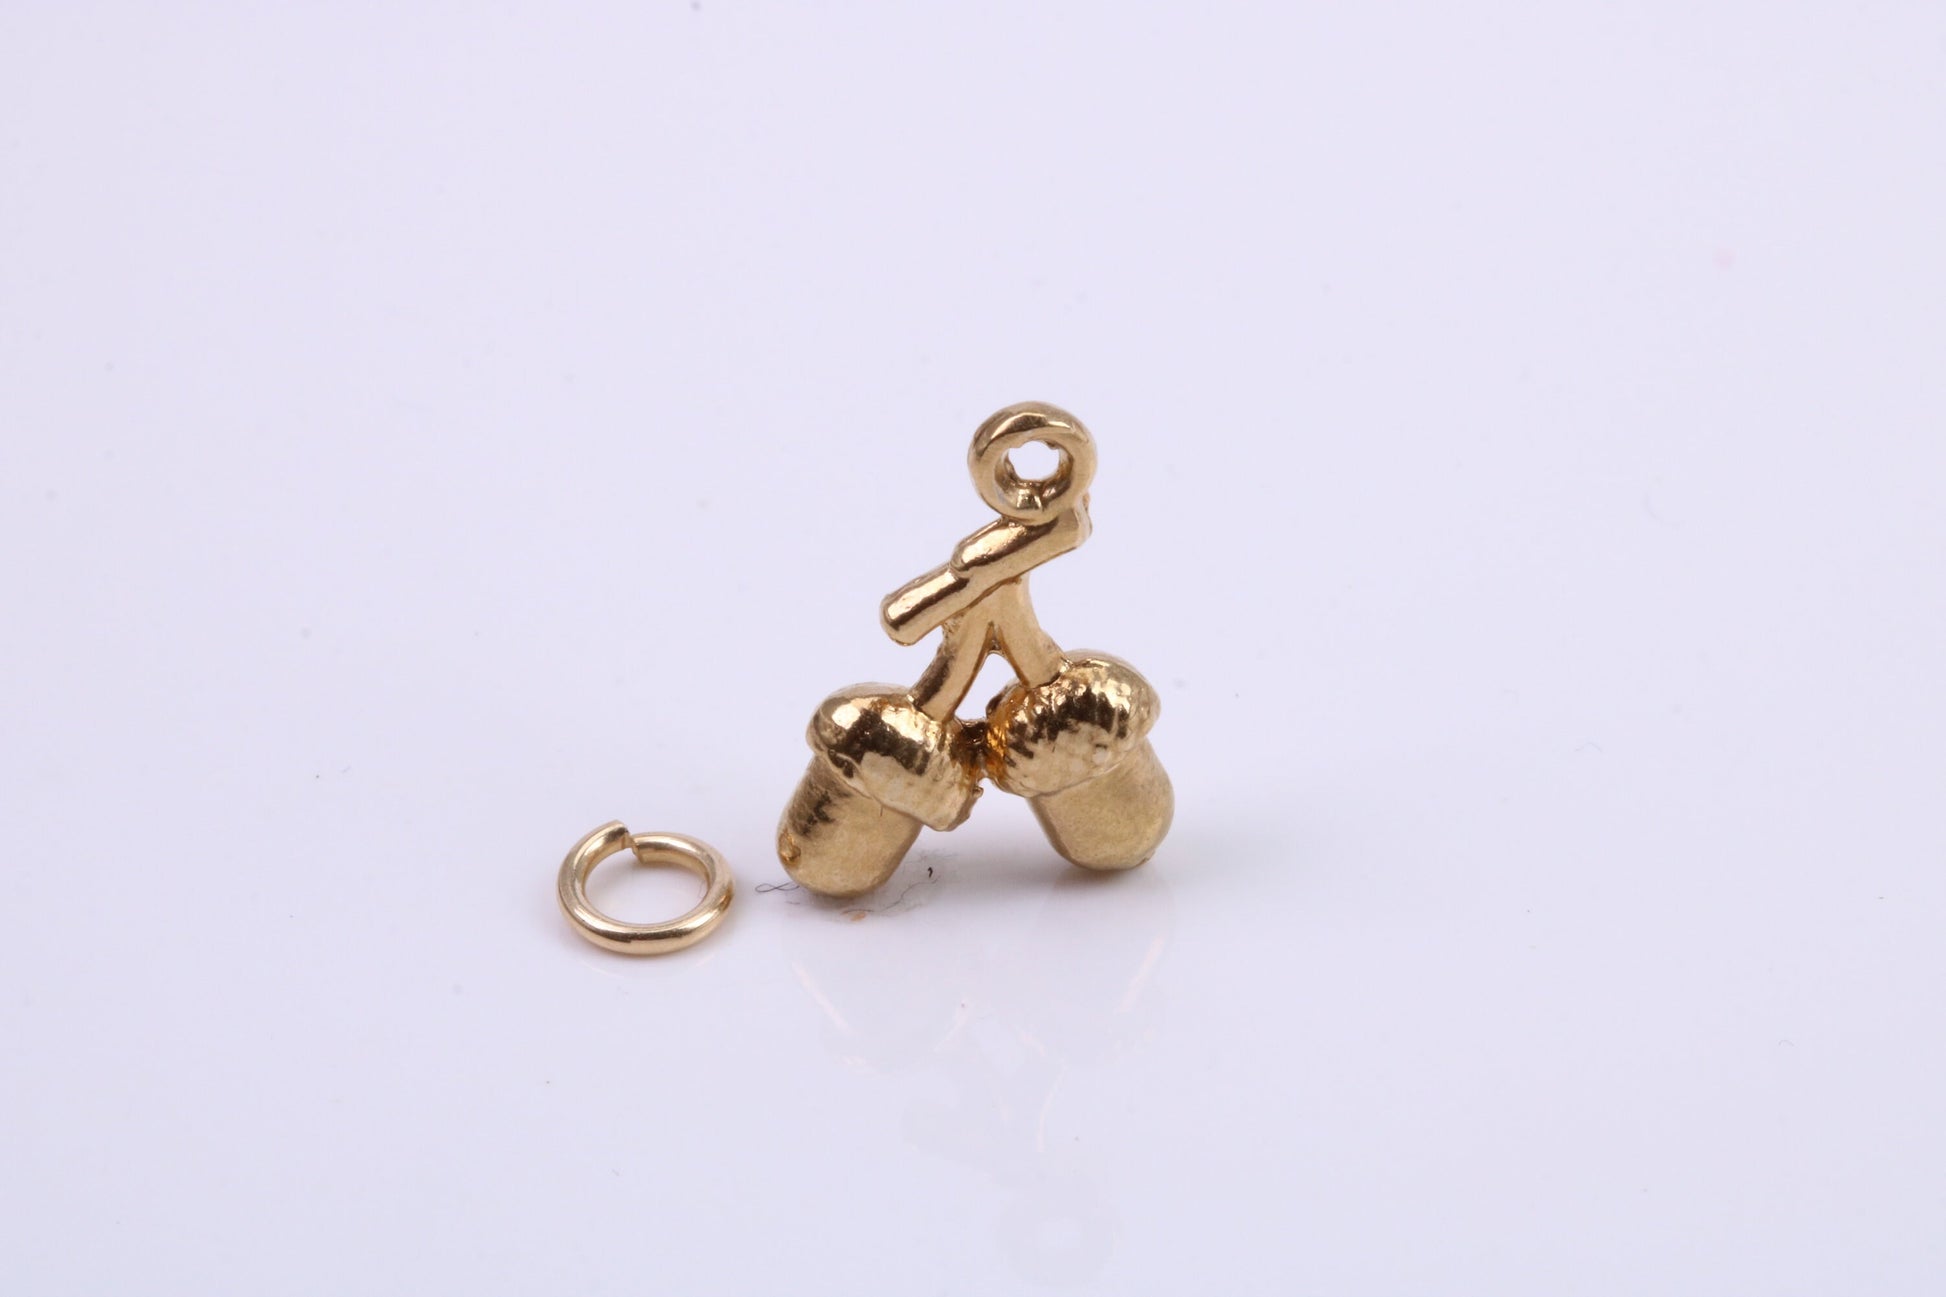 Acorns Charm, Traditional Charm, Made from Solid 9ct Yellow Gold, British Hallmarked, Complete with Attachment Link